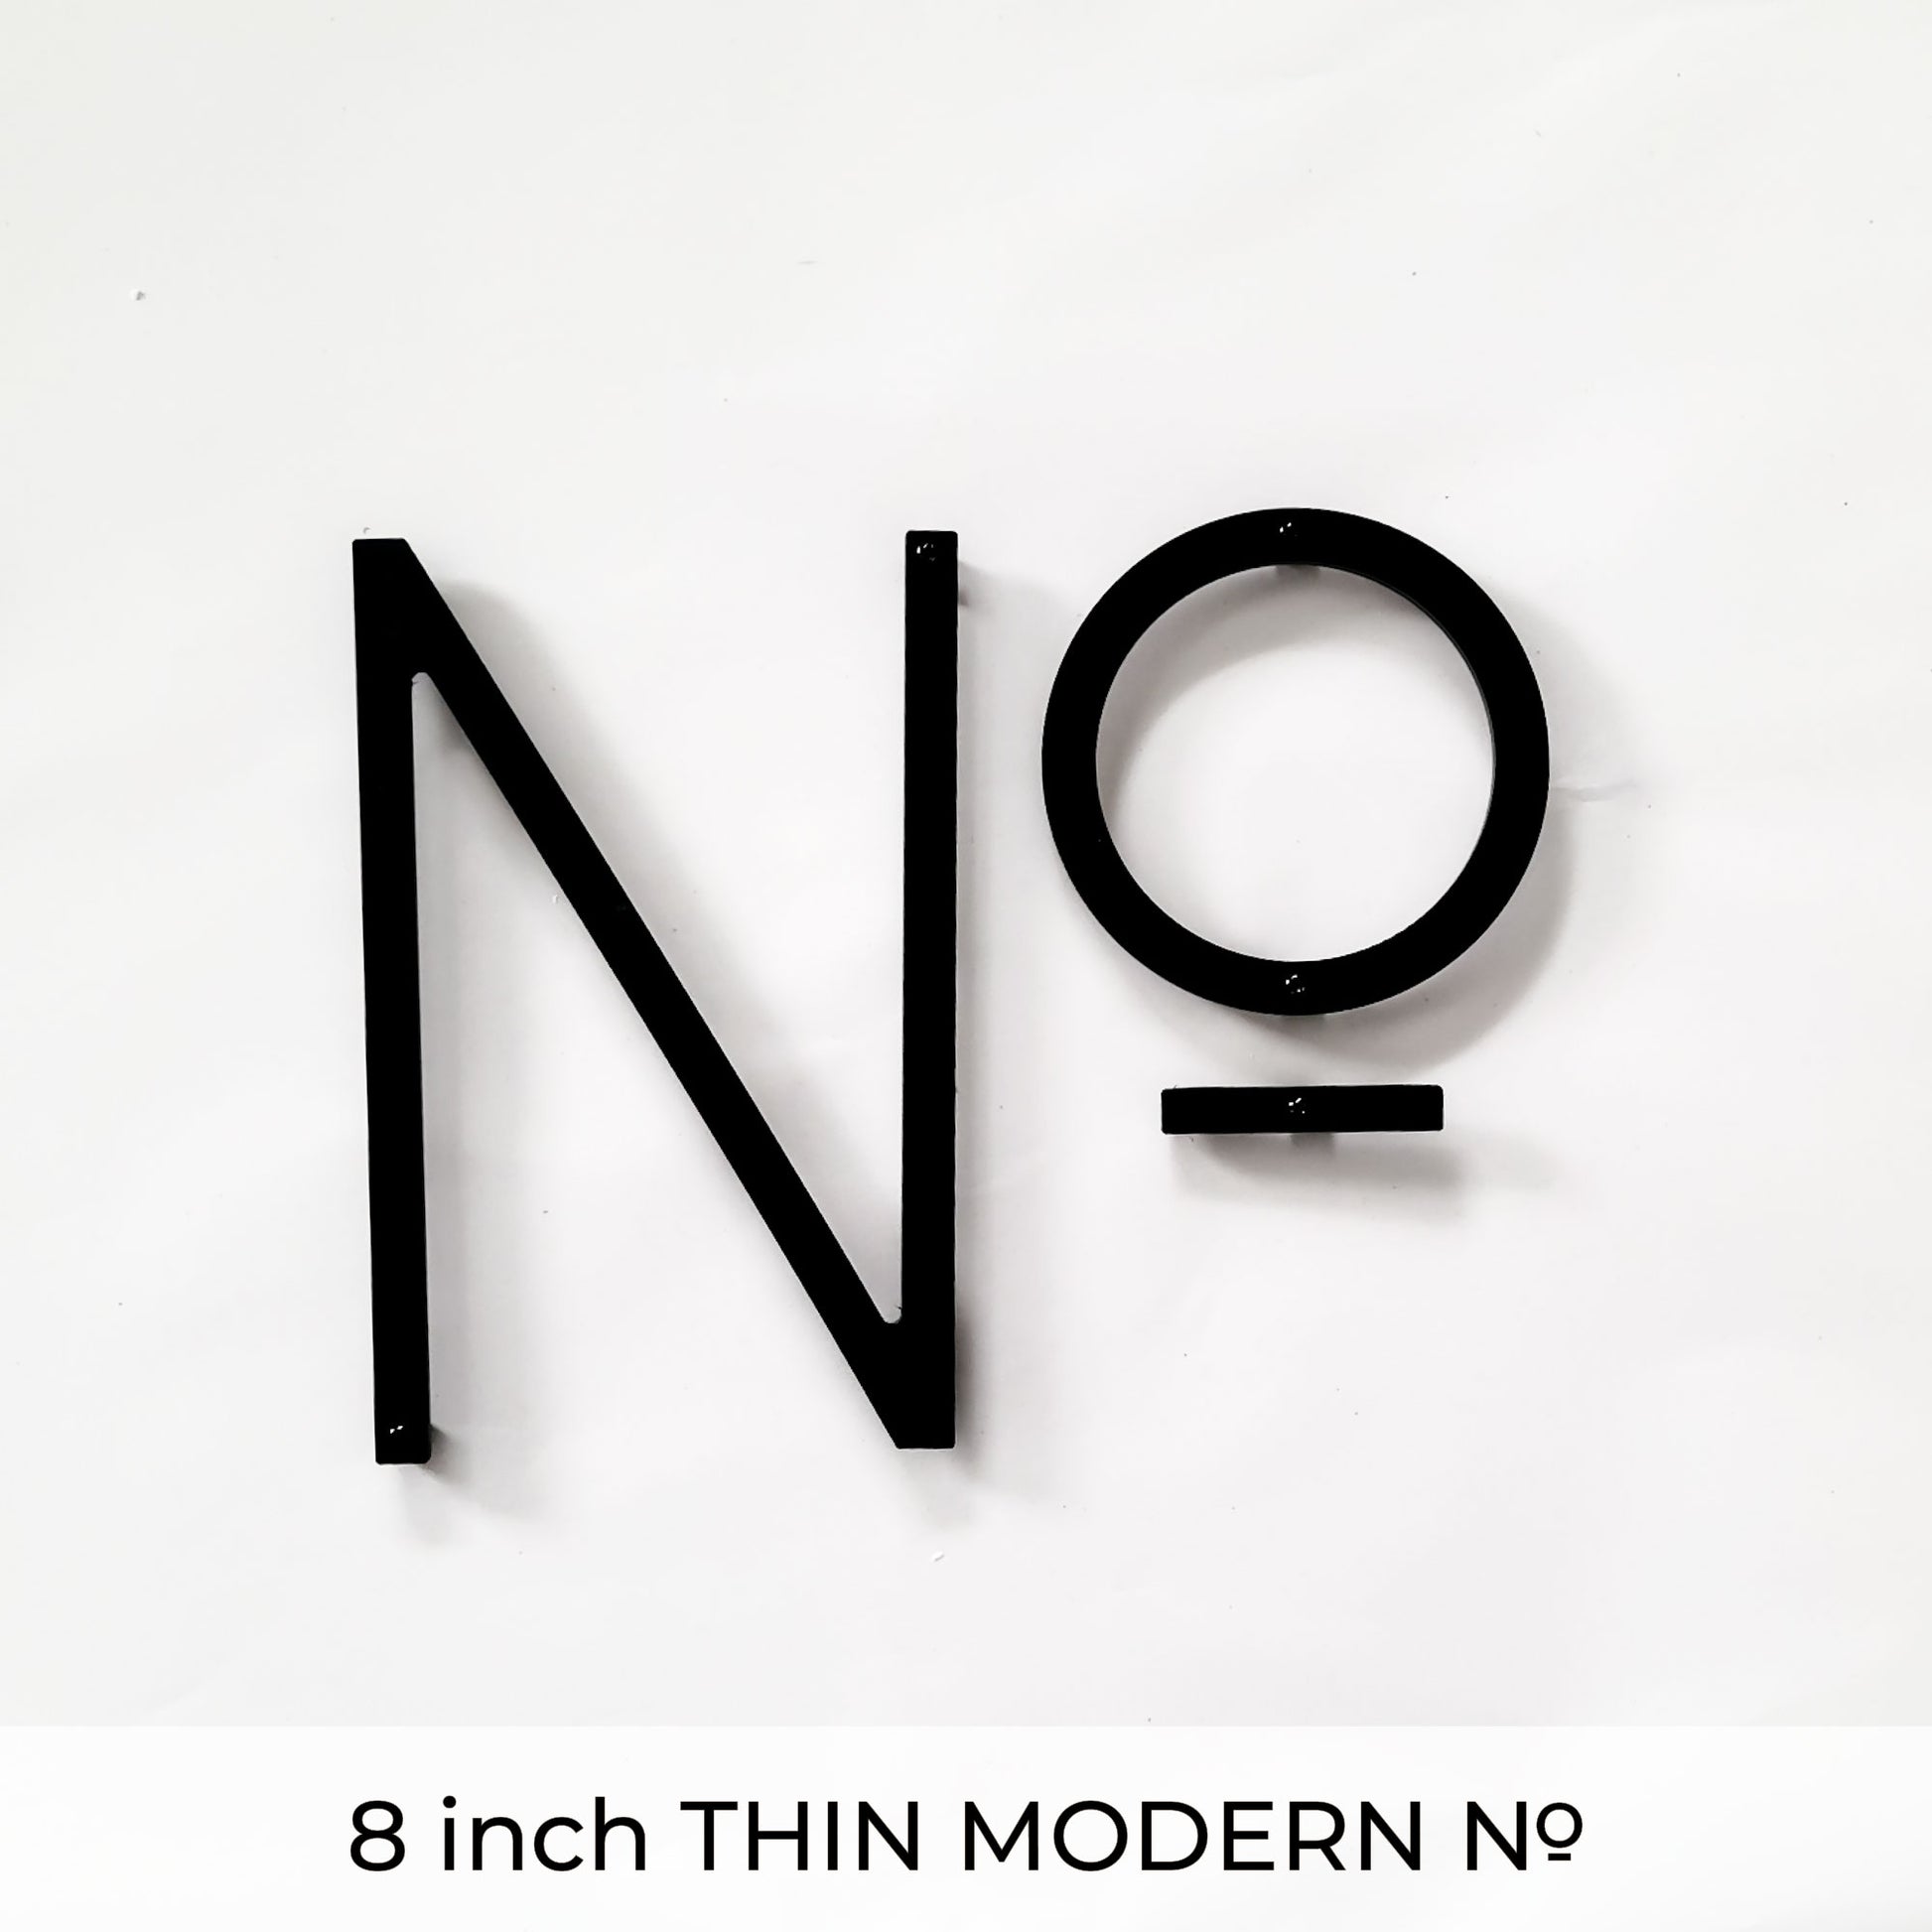 black THIN MODERN house numbers and No letters